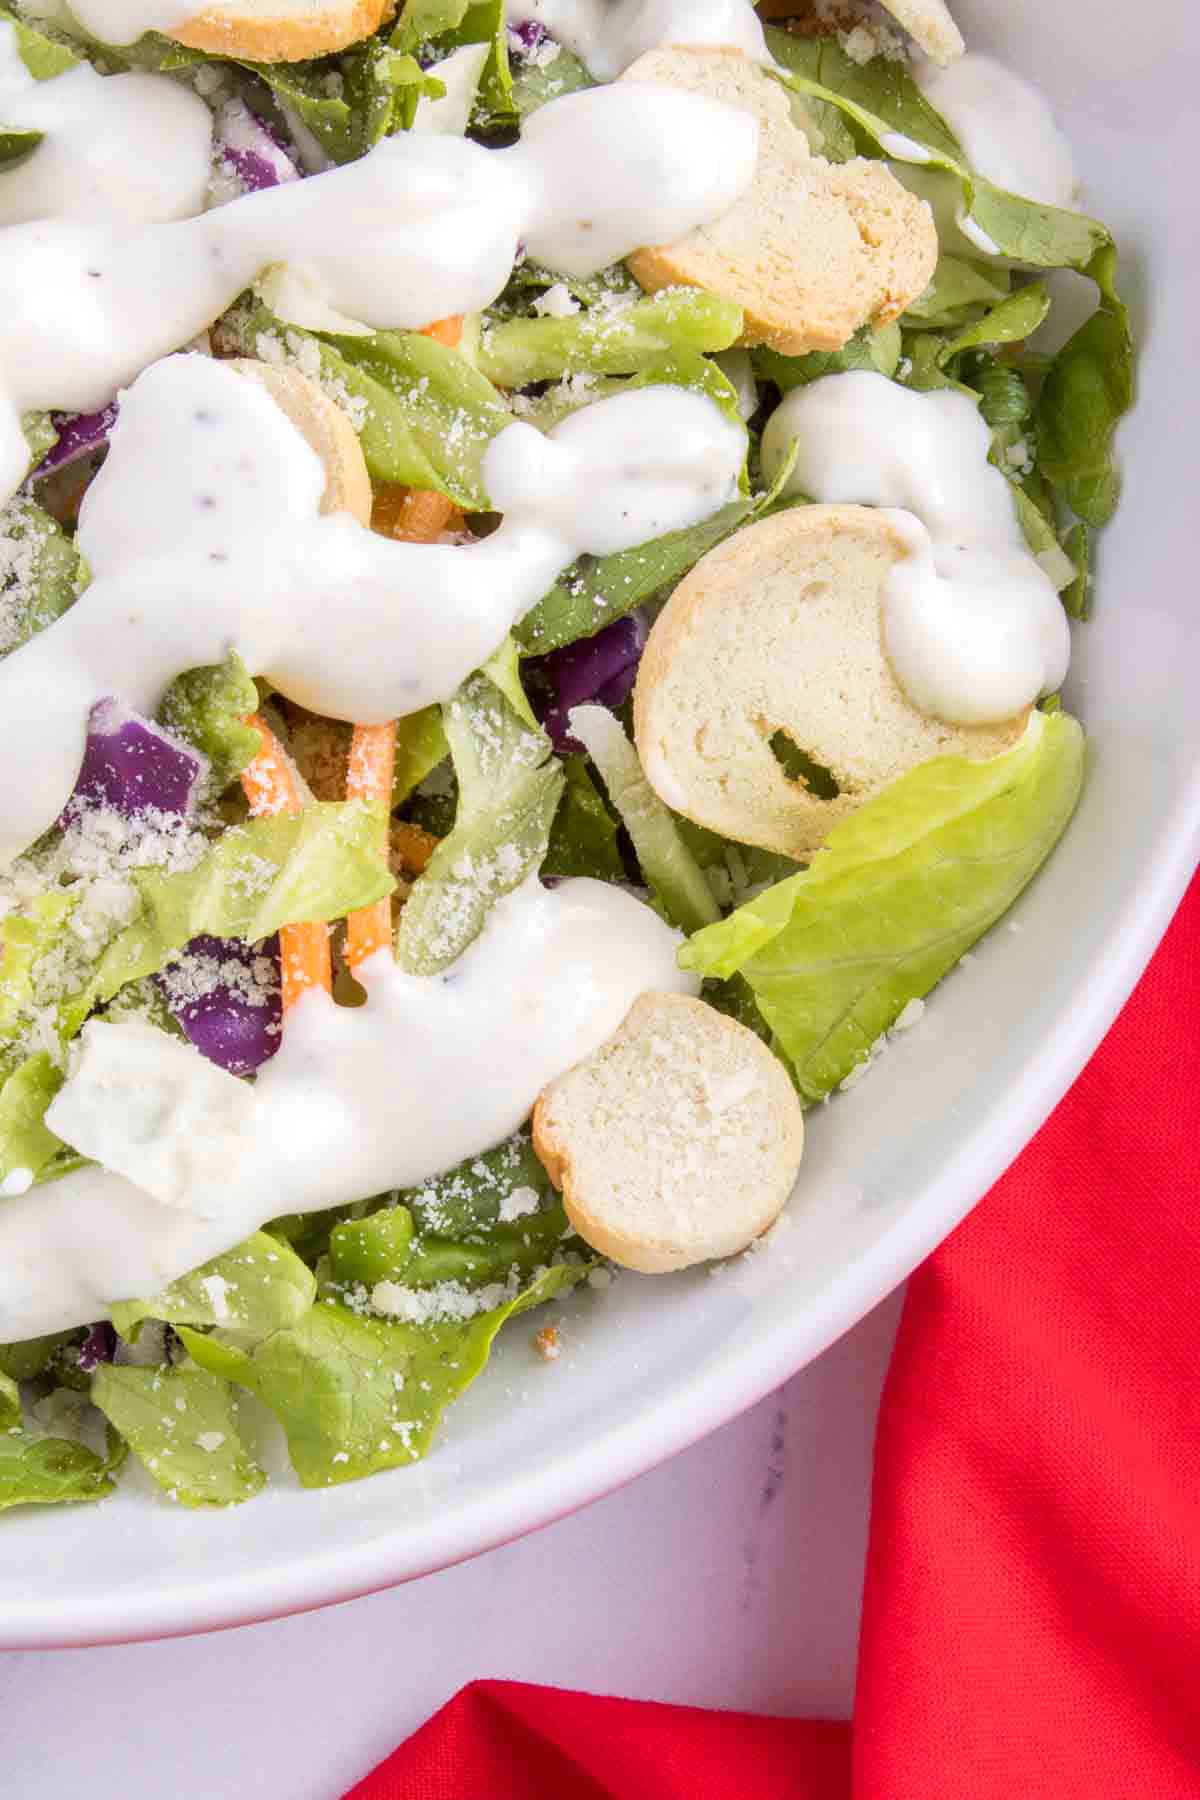 ranch dressing drizzled over salad with croutons and carrots